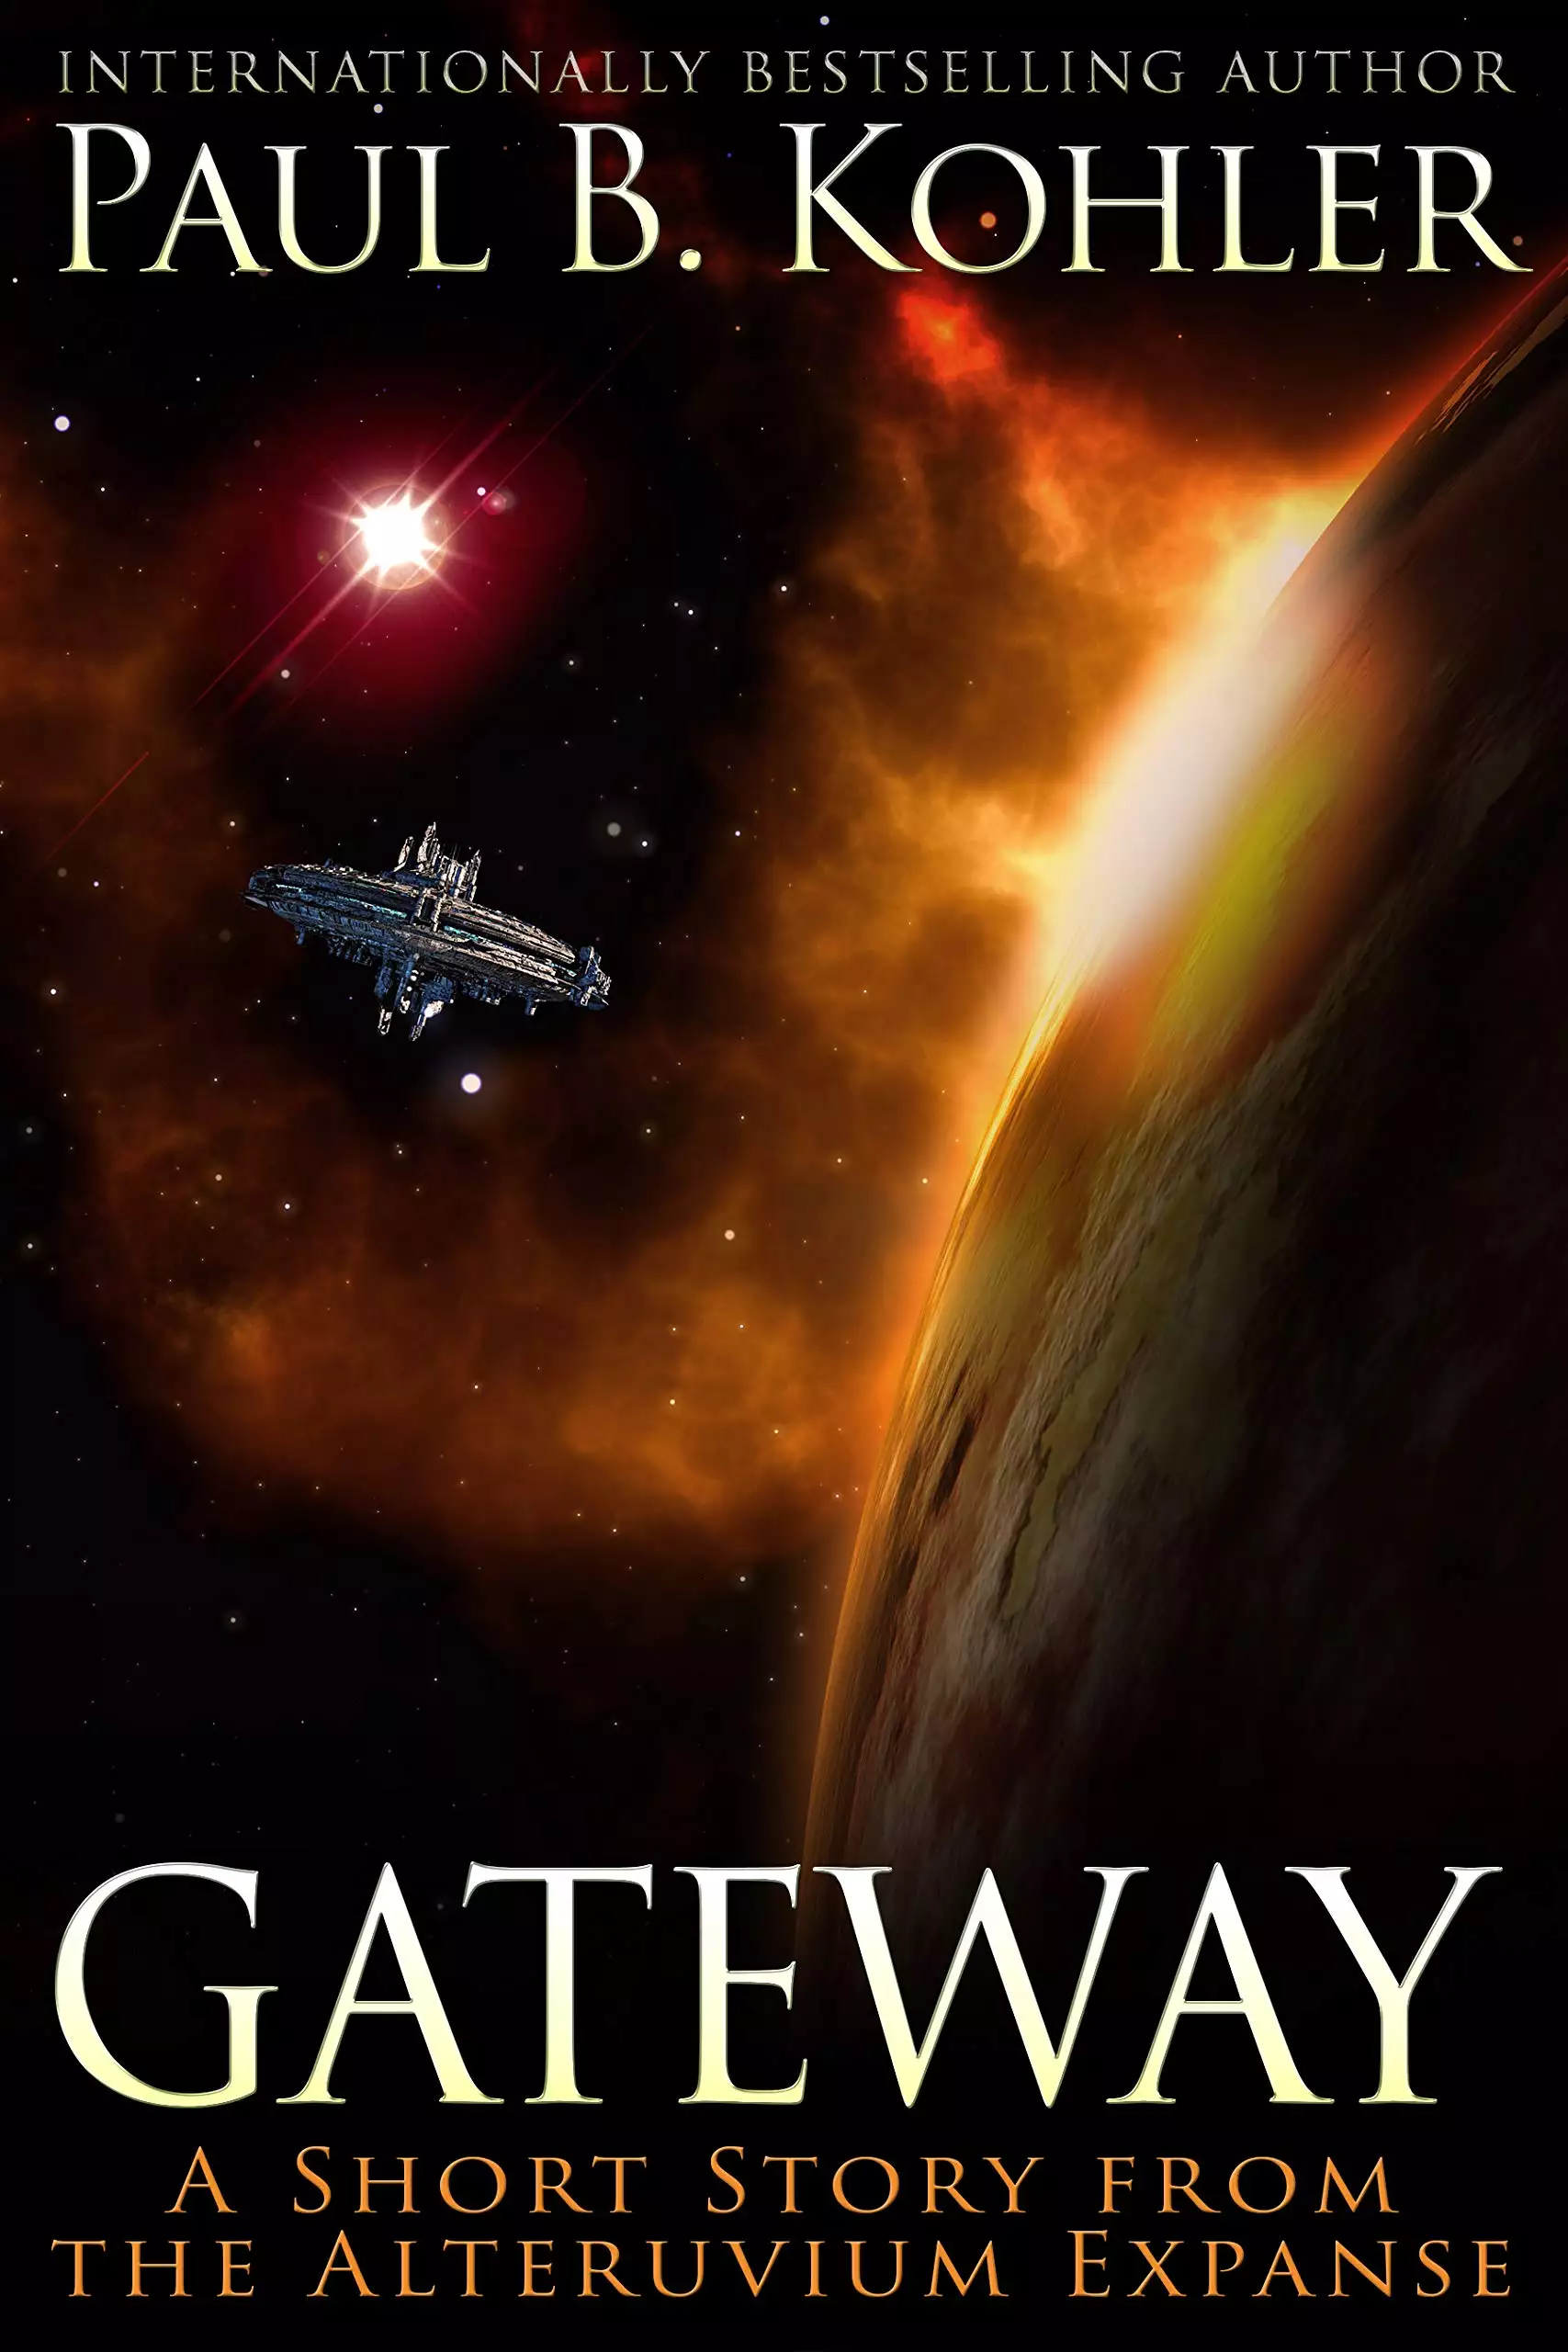 Gateway: A Short Story from the Alteruvium Expanse